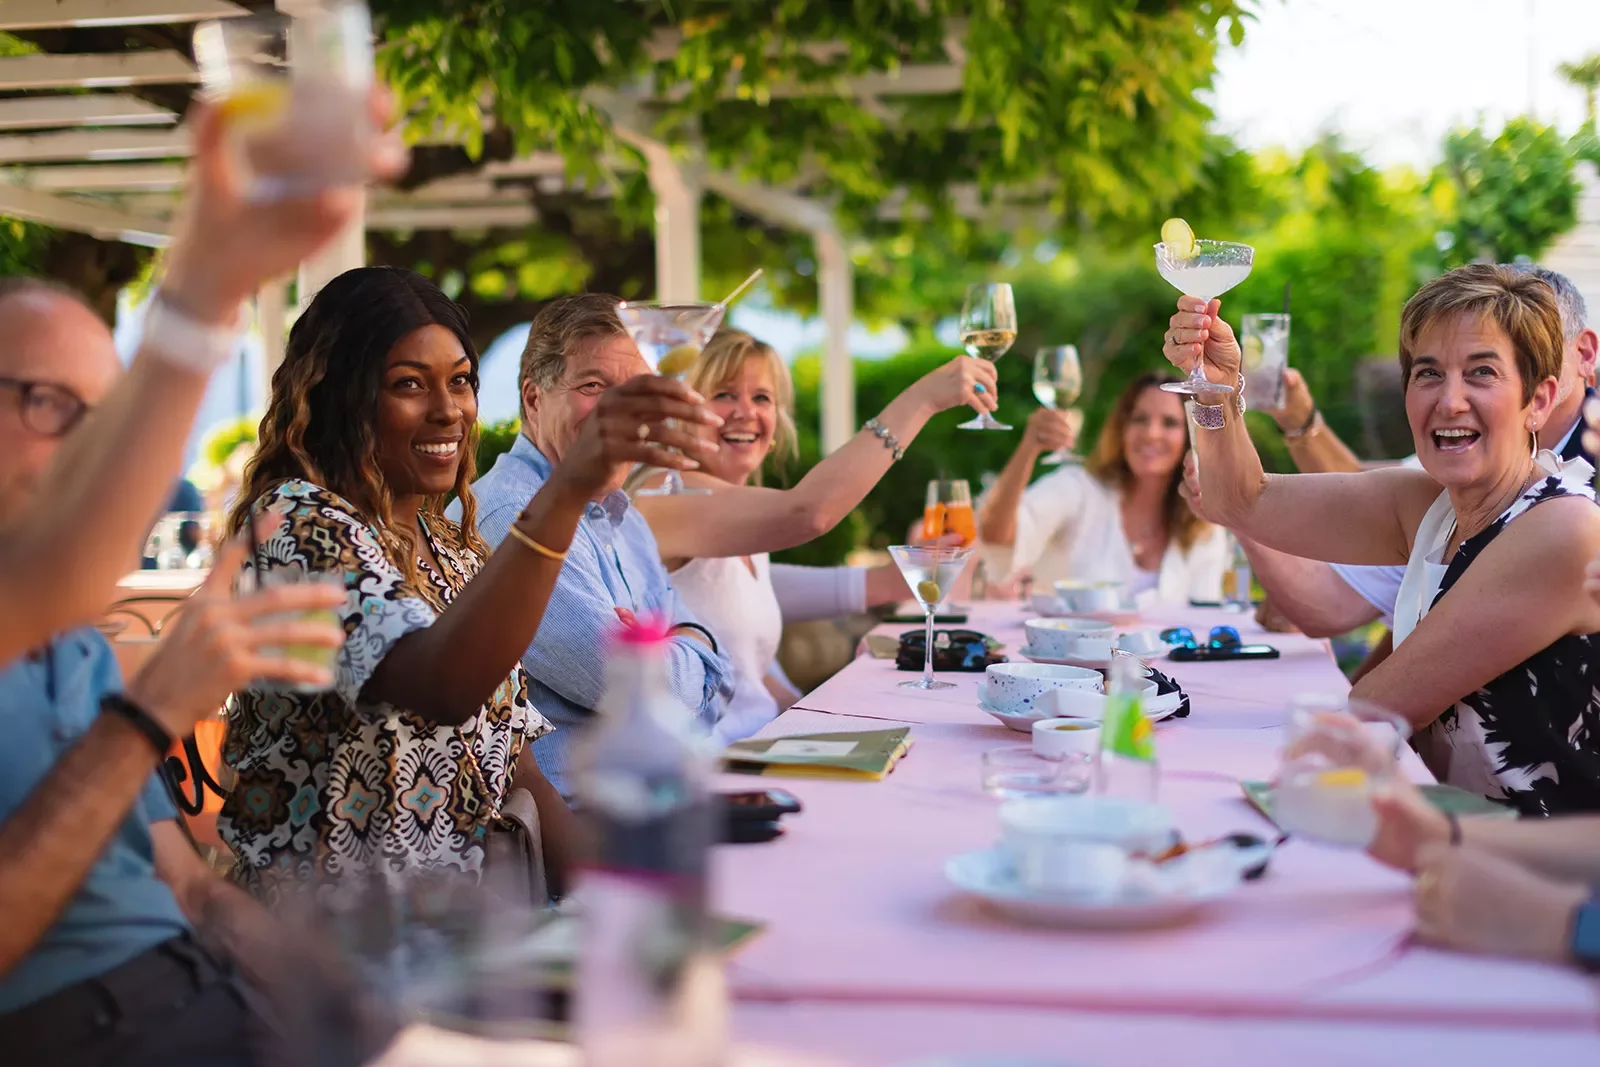 Group of guests cheersing glasses at meal.